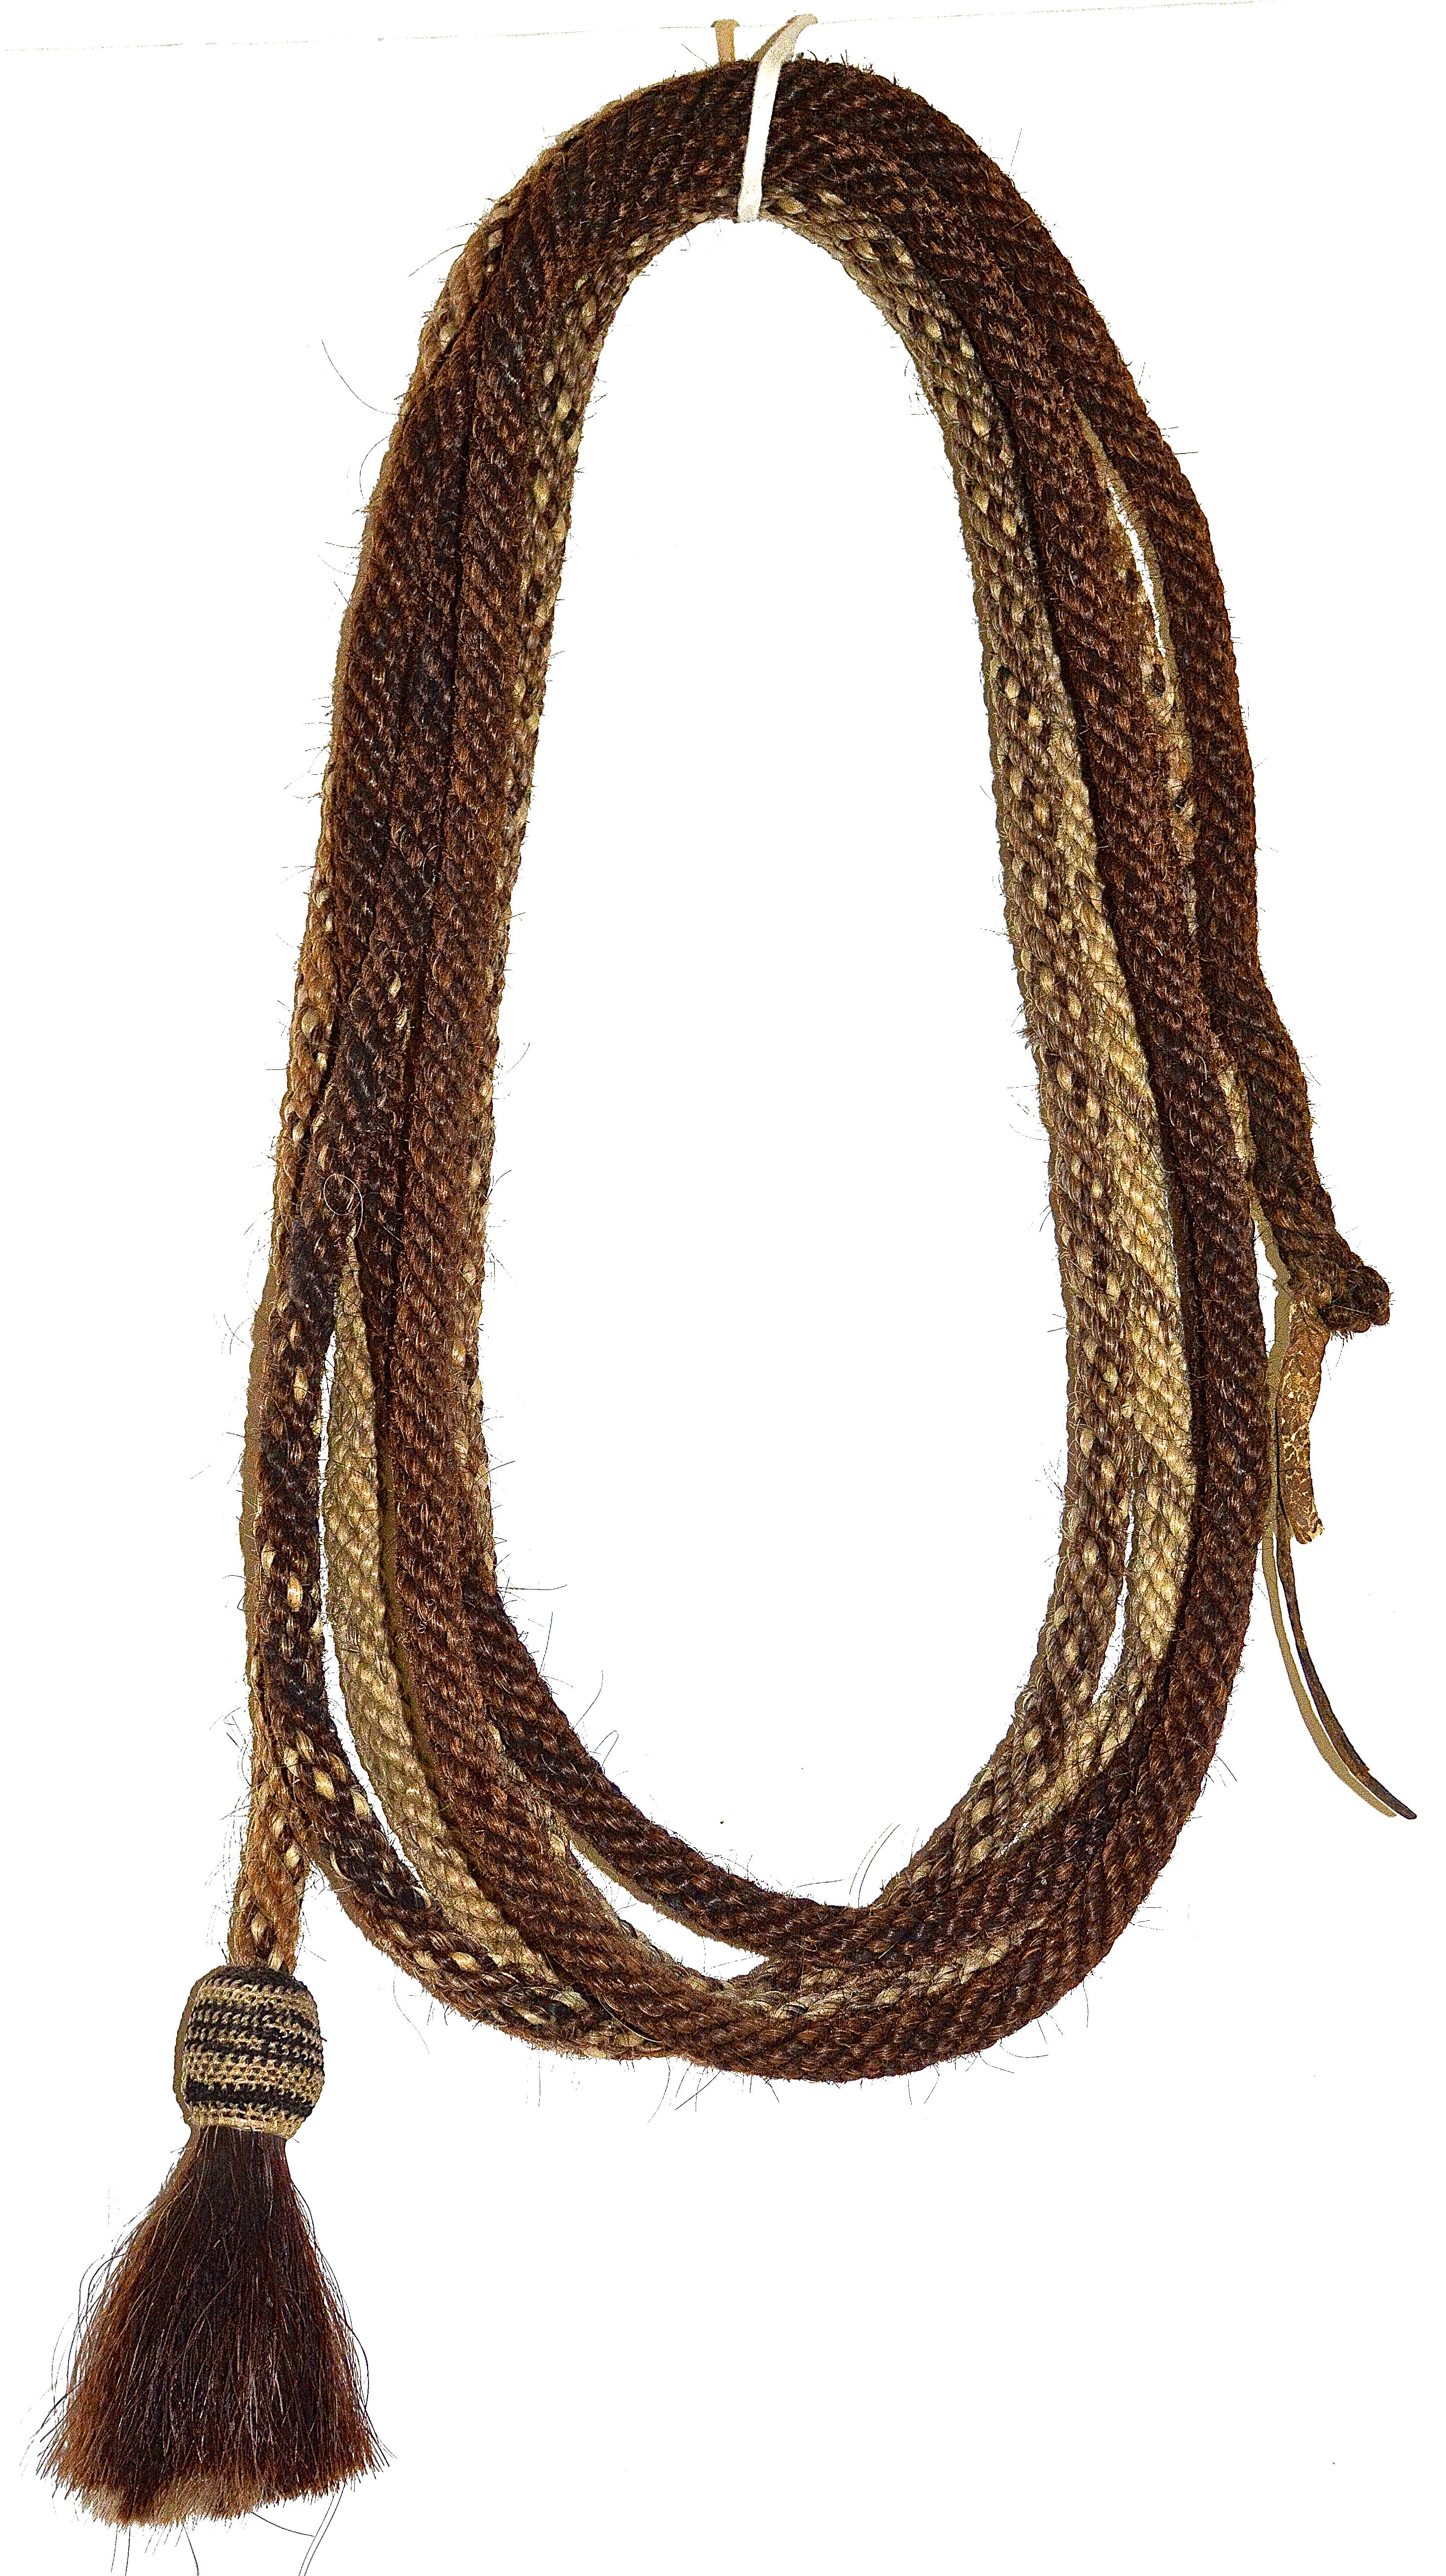 Navajo Braided Horsehair Rope
1890s
Braided horsehair, leather
20 ' Long

A rare late 19th Century Navajo braided horsehair rope, 20 feet in overall length, appearing in very good original condition.